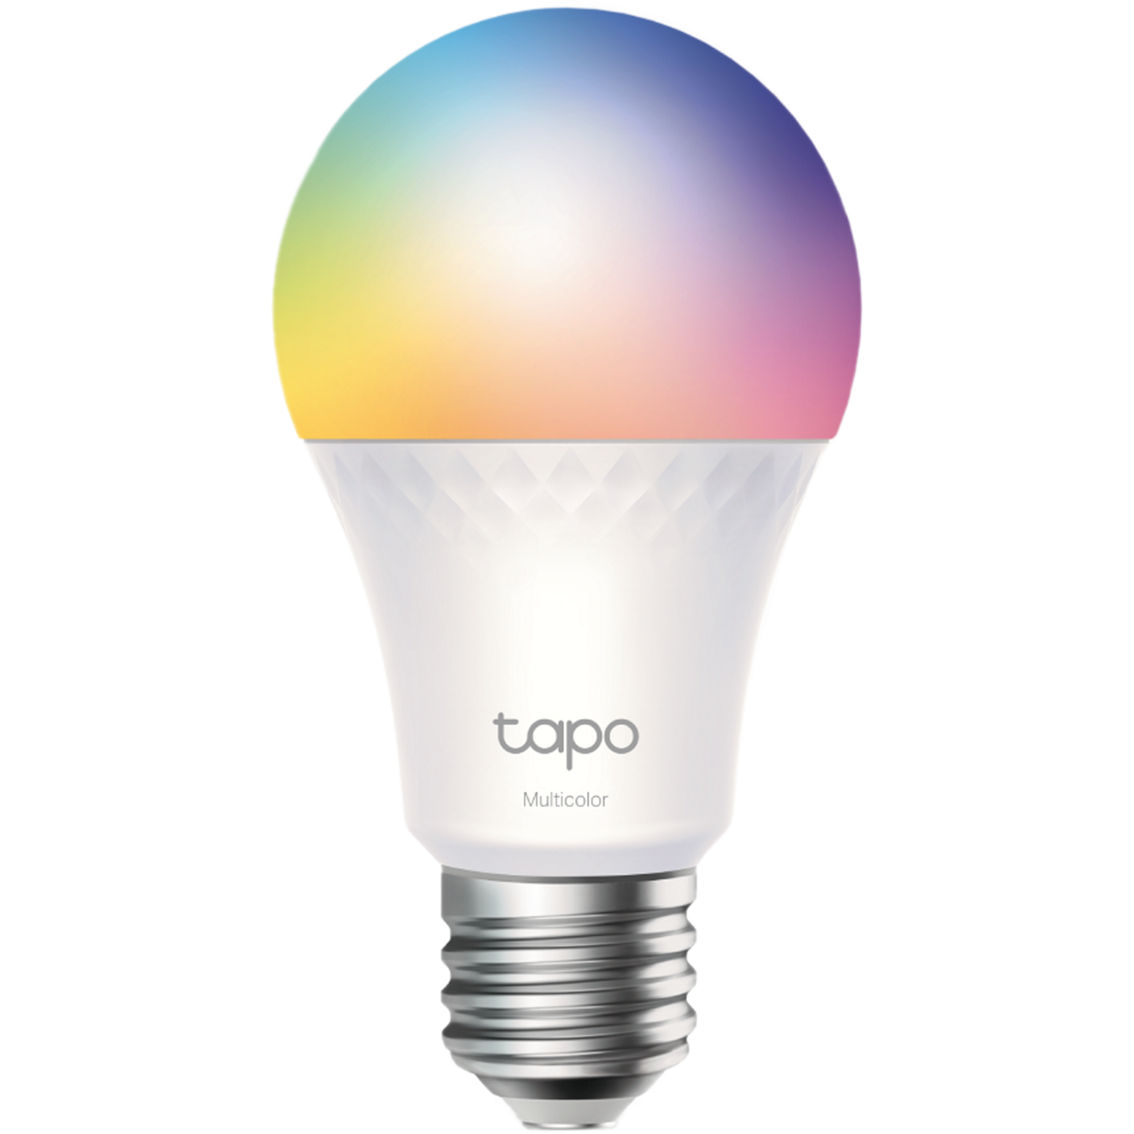 TP-Link Tapo Smart Wi-Fi Color Bulb with Matter Integration 2 pk. - Image 2 of 2